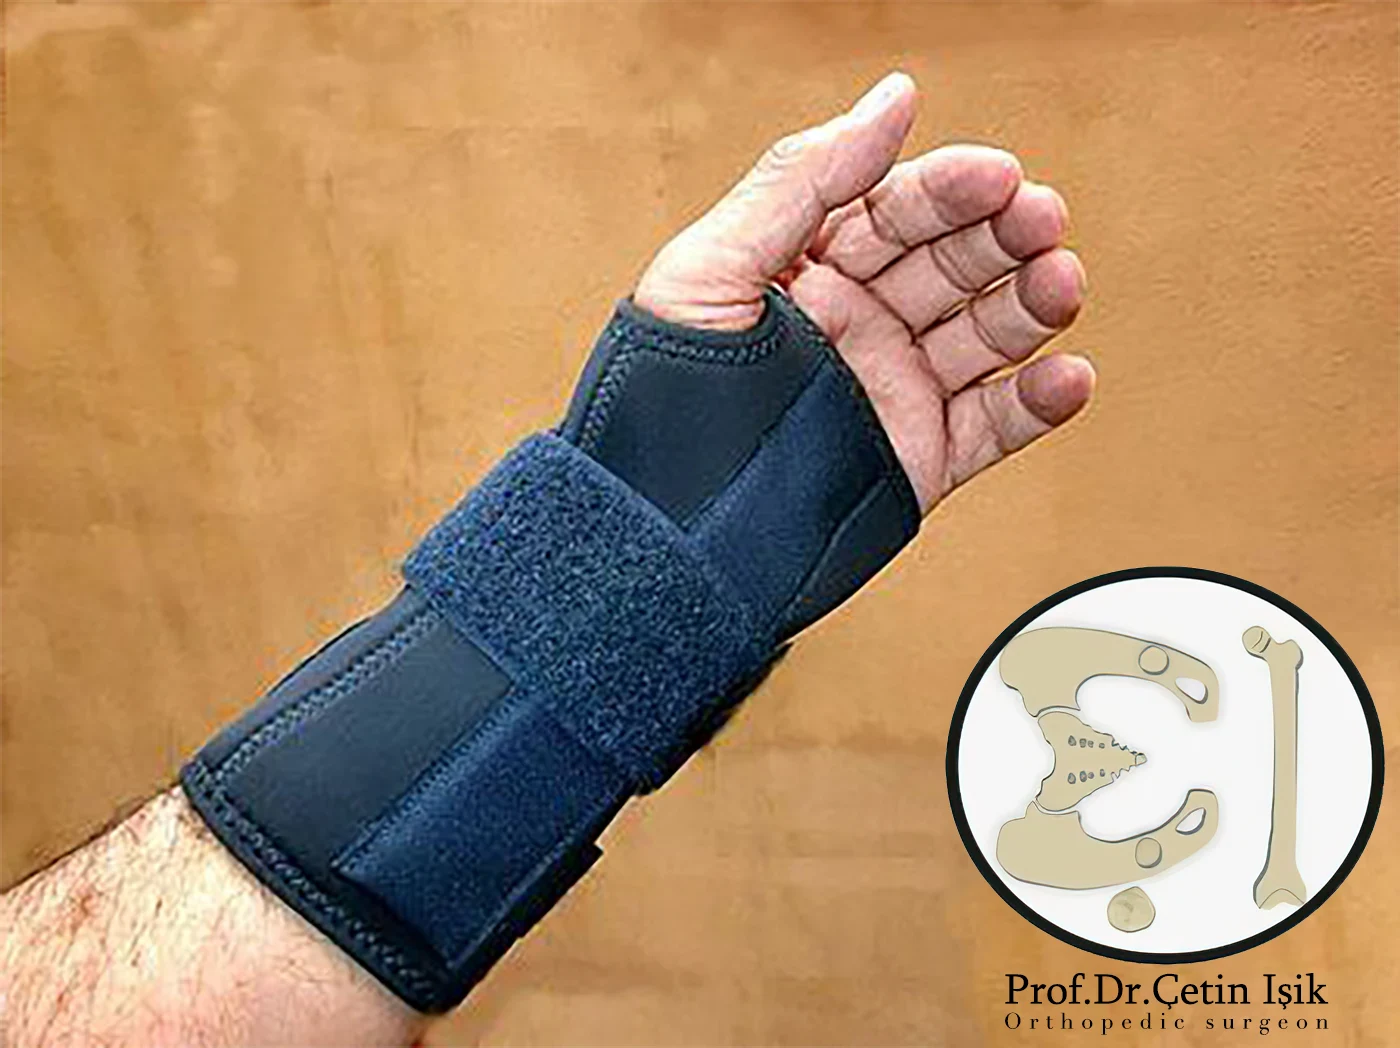 A wrist extension splint is used for the elbow of a tennis player.